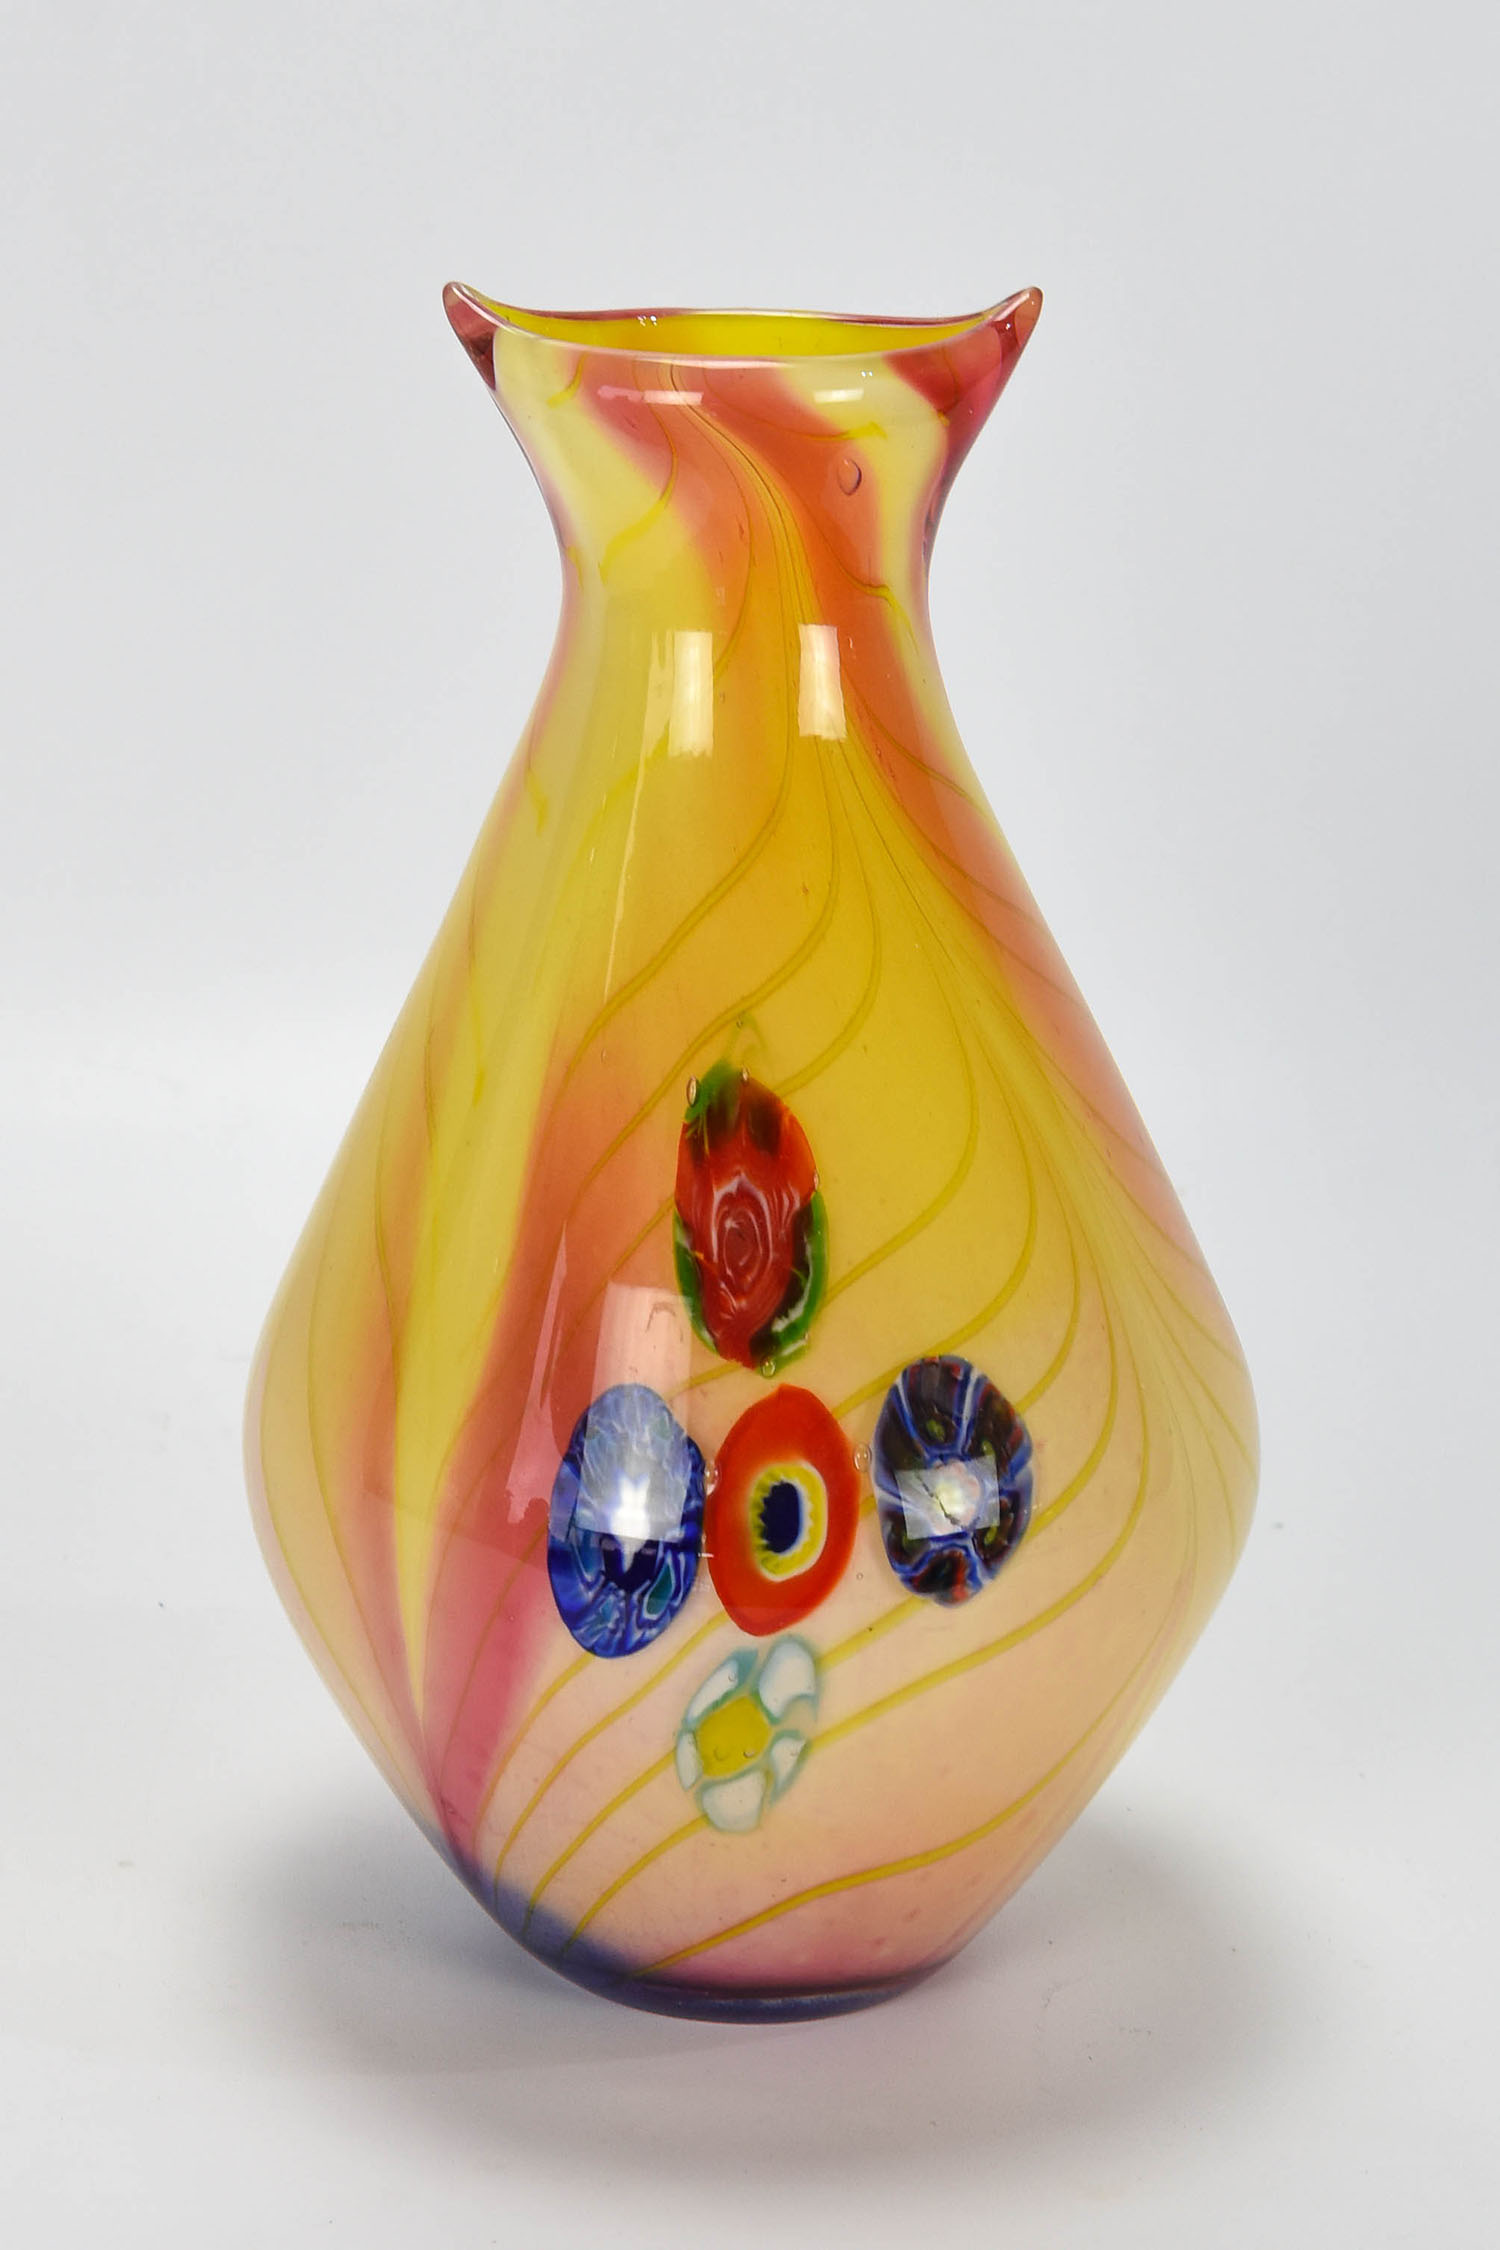 Italian Pulled Feather Cut Cane Art Glass Vase